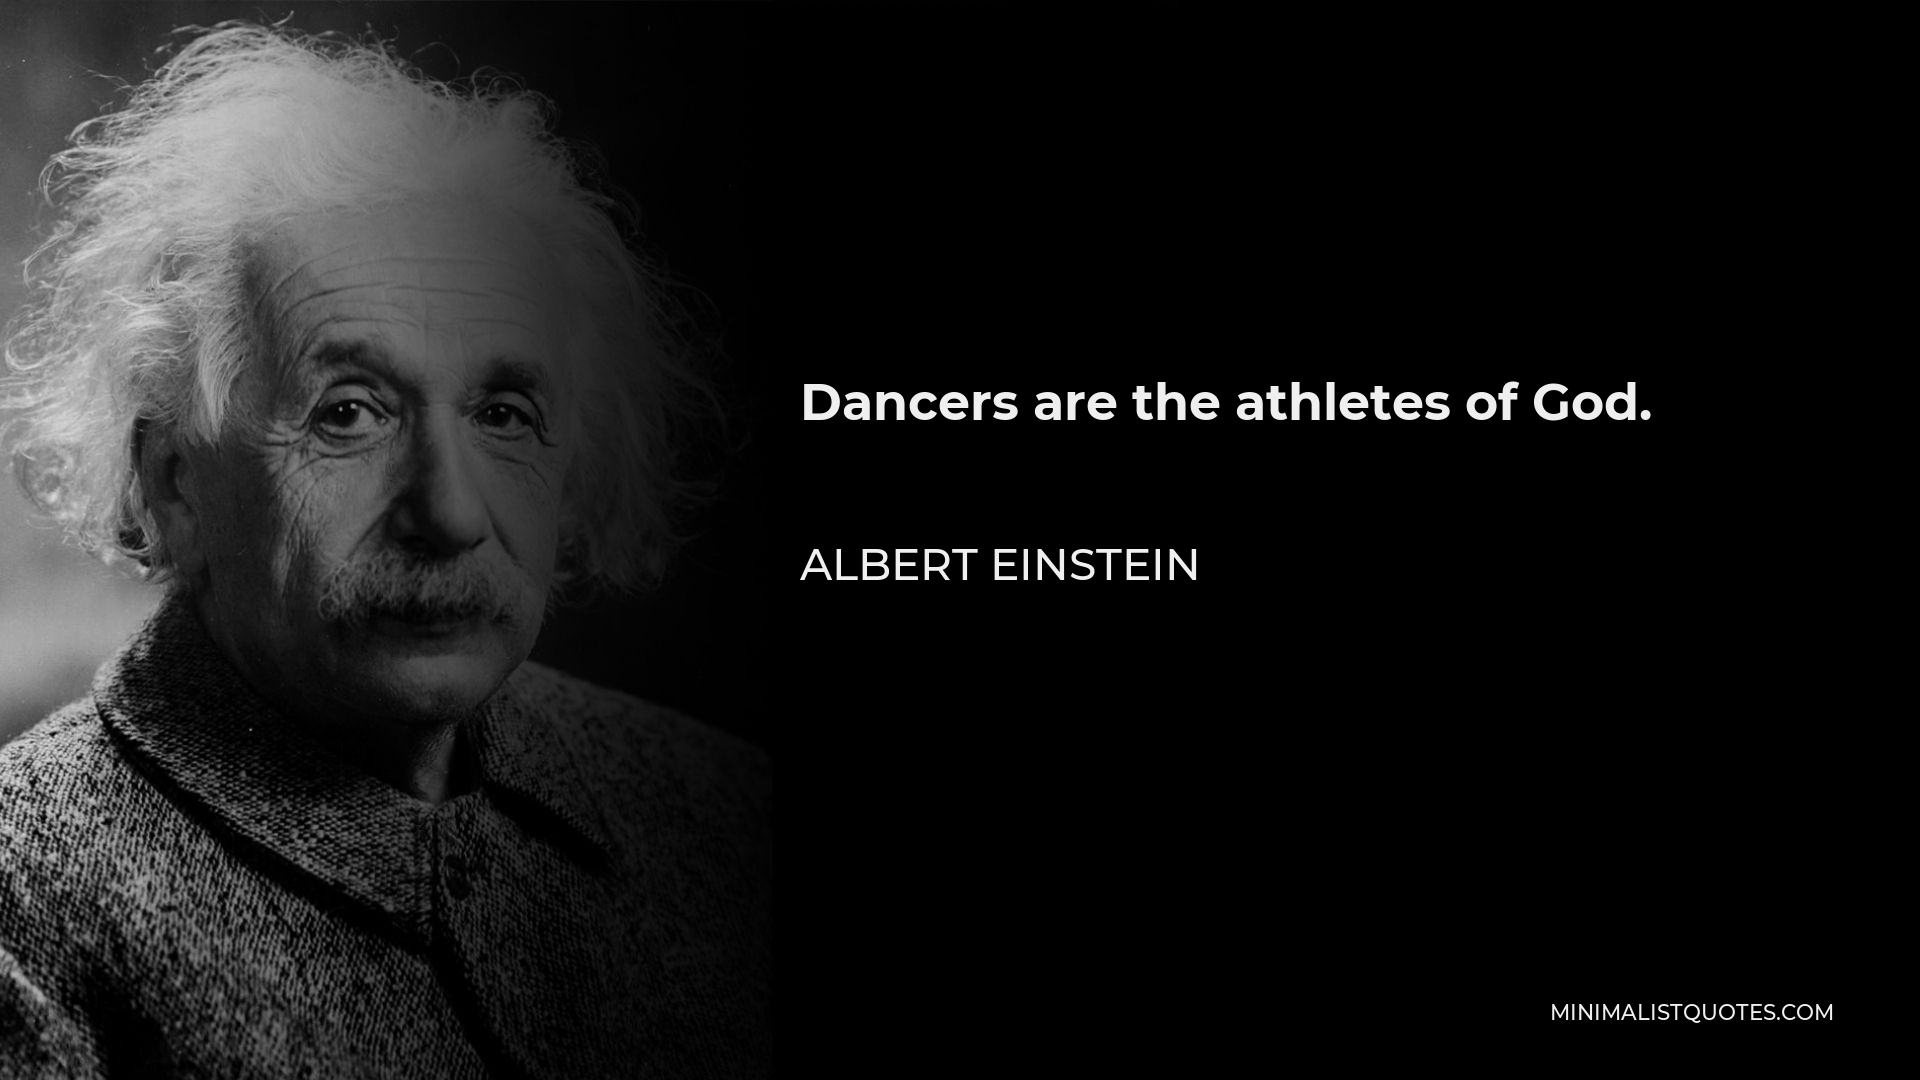 Albert Einstein Quote - Dancers are the athletes of God.